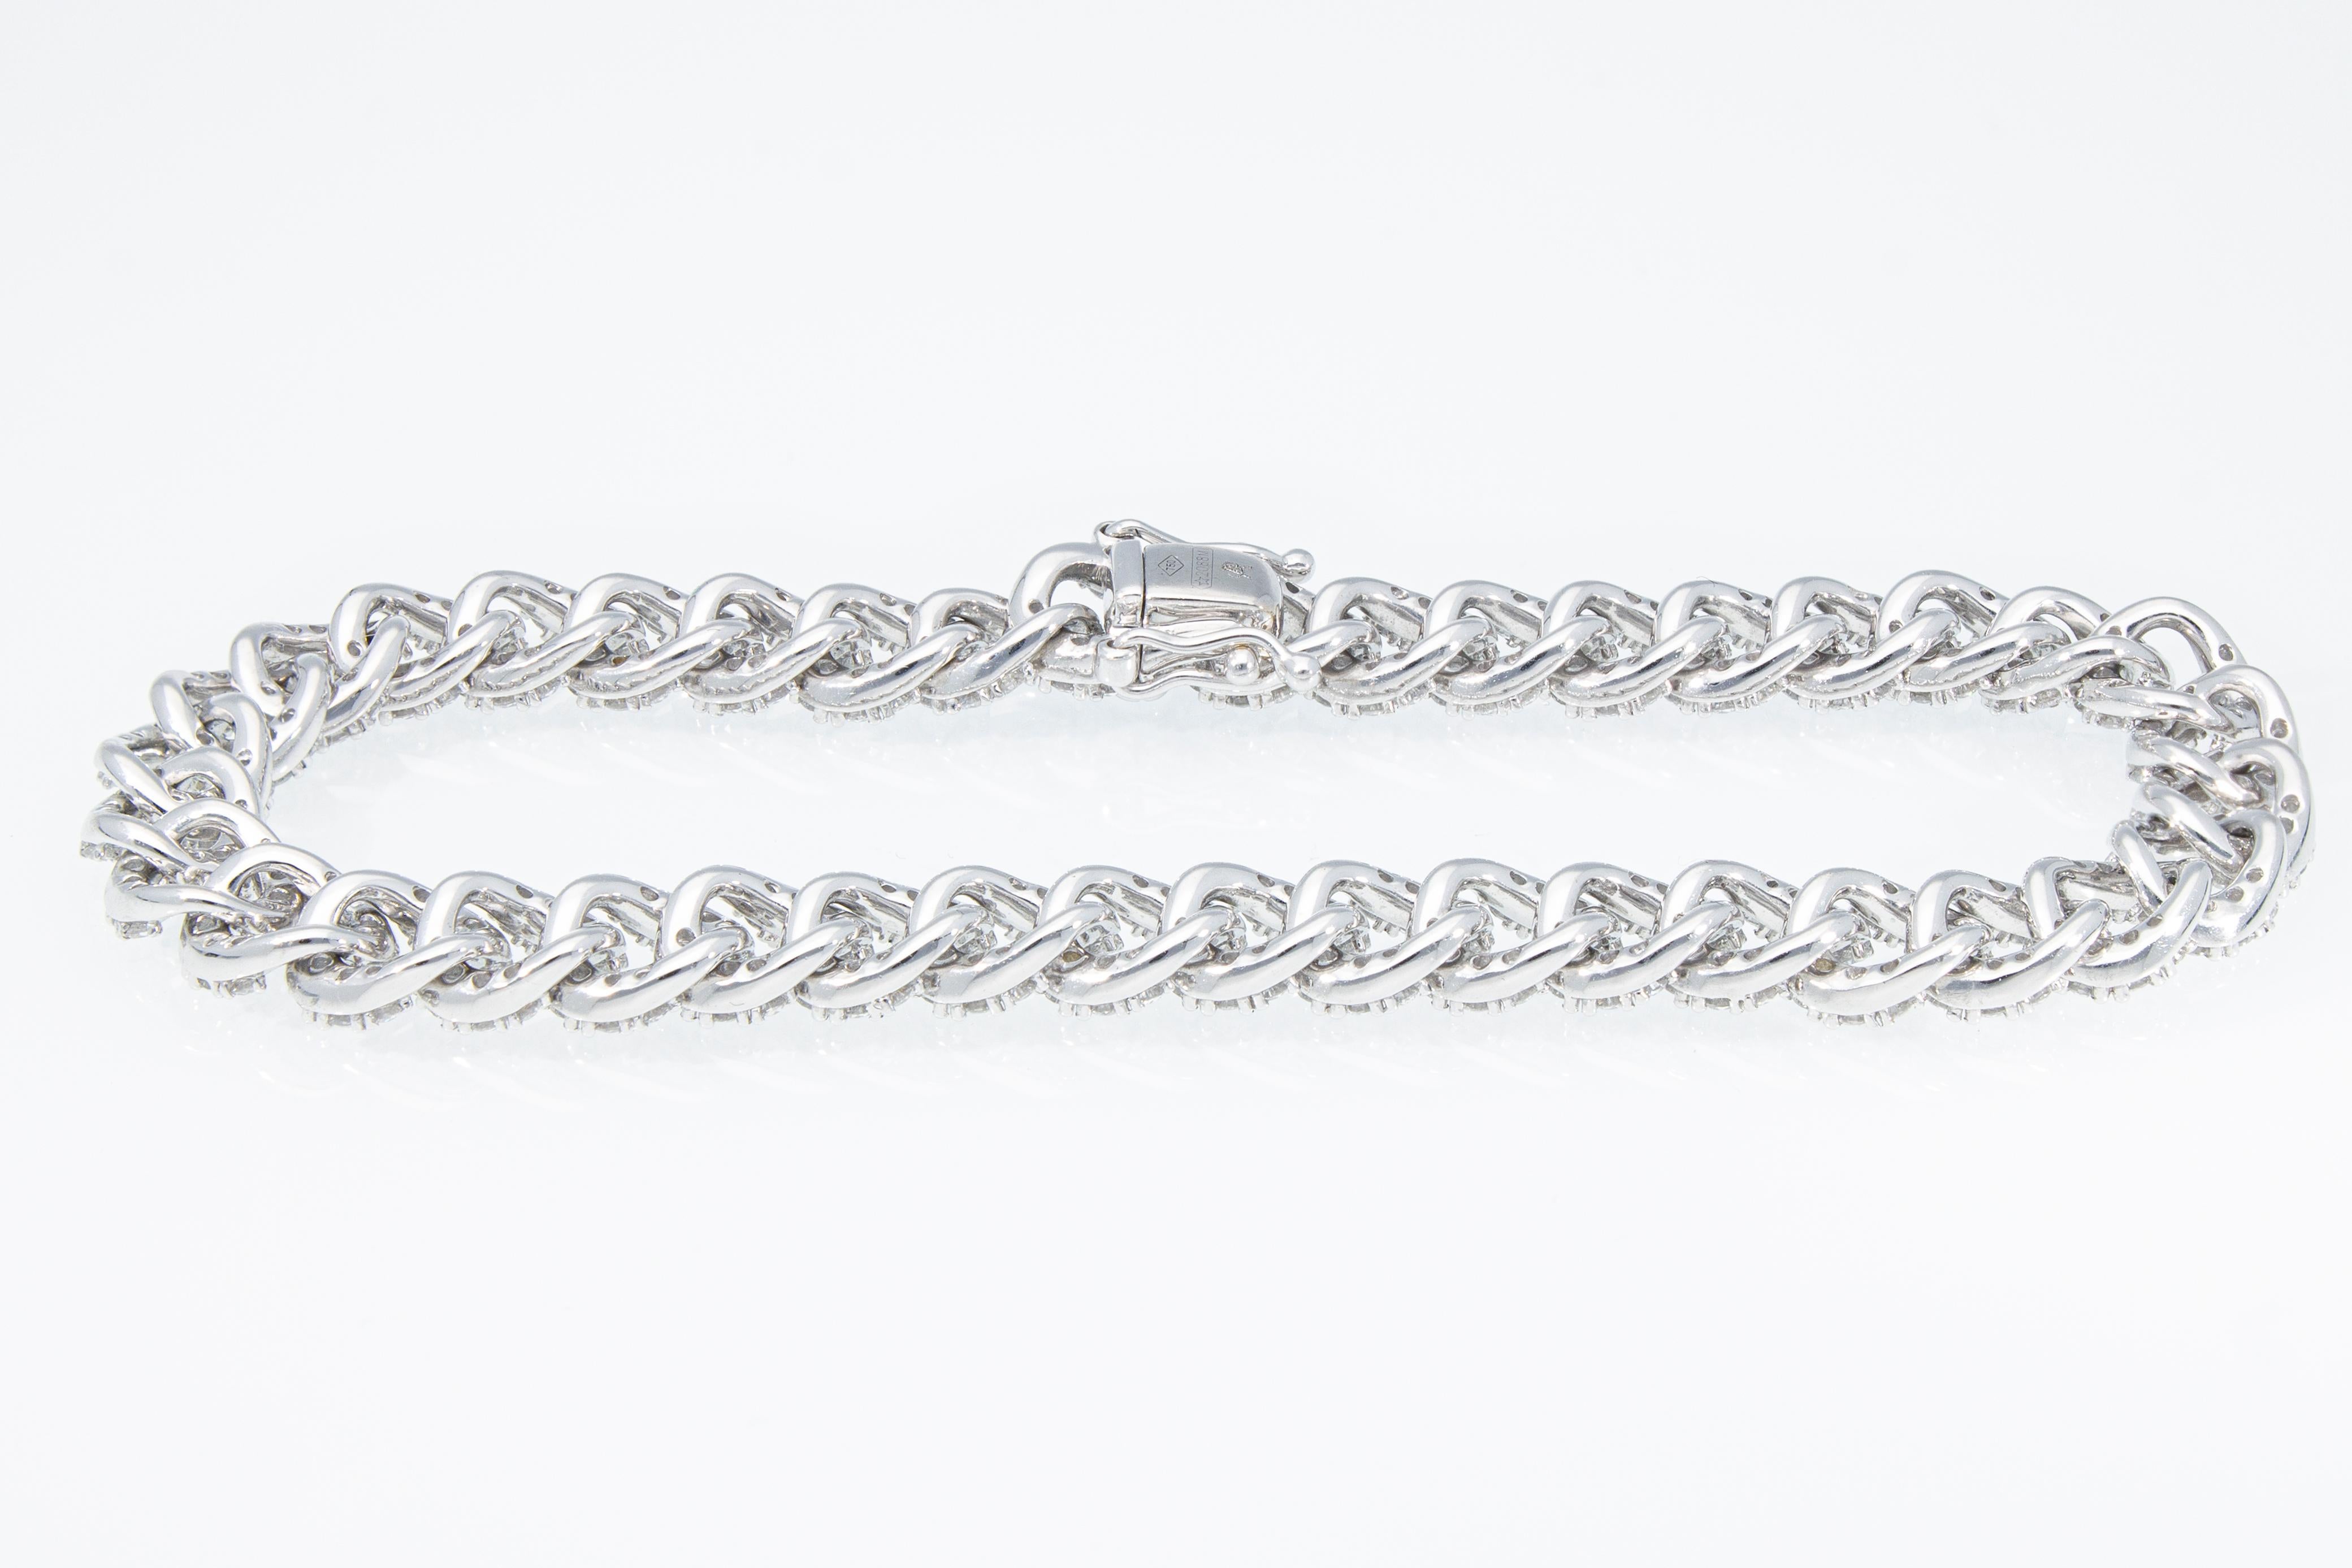 Groumette Bracelet with Ct 3.35 of Diamonds, 18 Kt White Gold For Sale 10